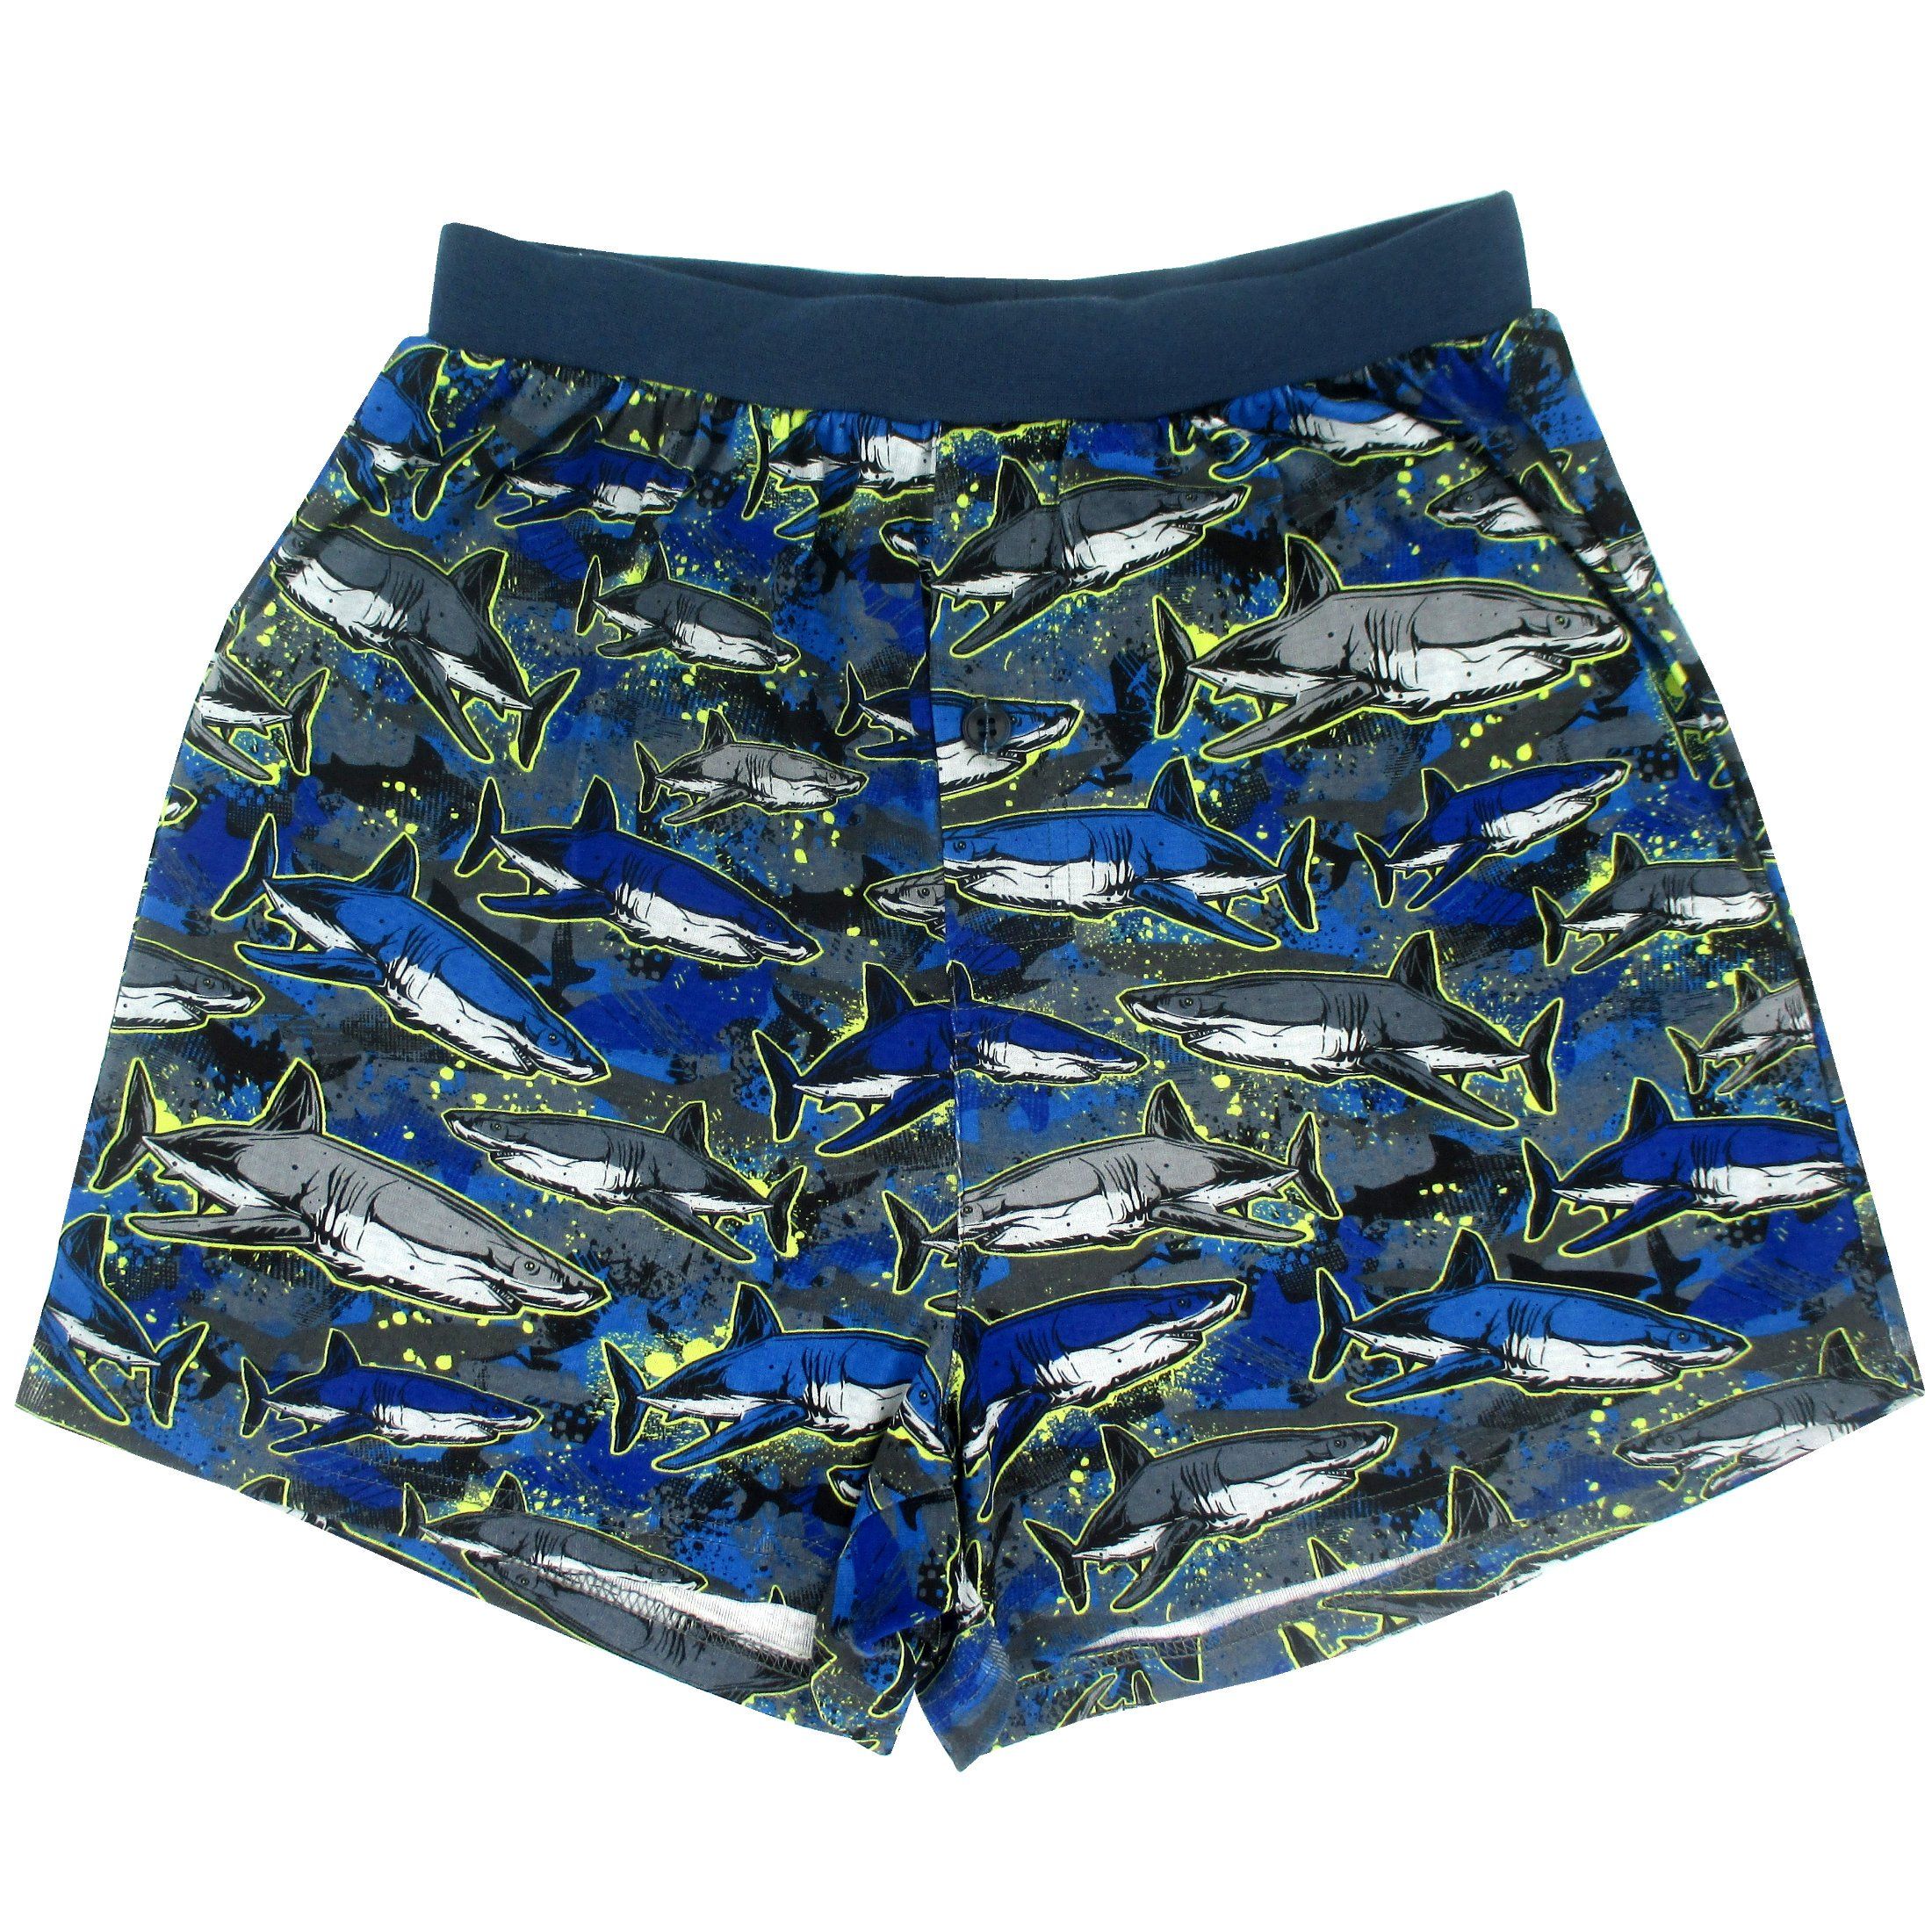 Work At Home Attire. Boxer Shorts Pajama Pants Loungewear with Shark Pattern